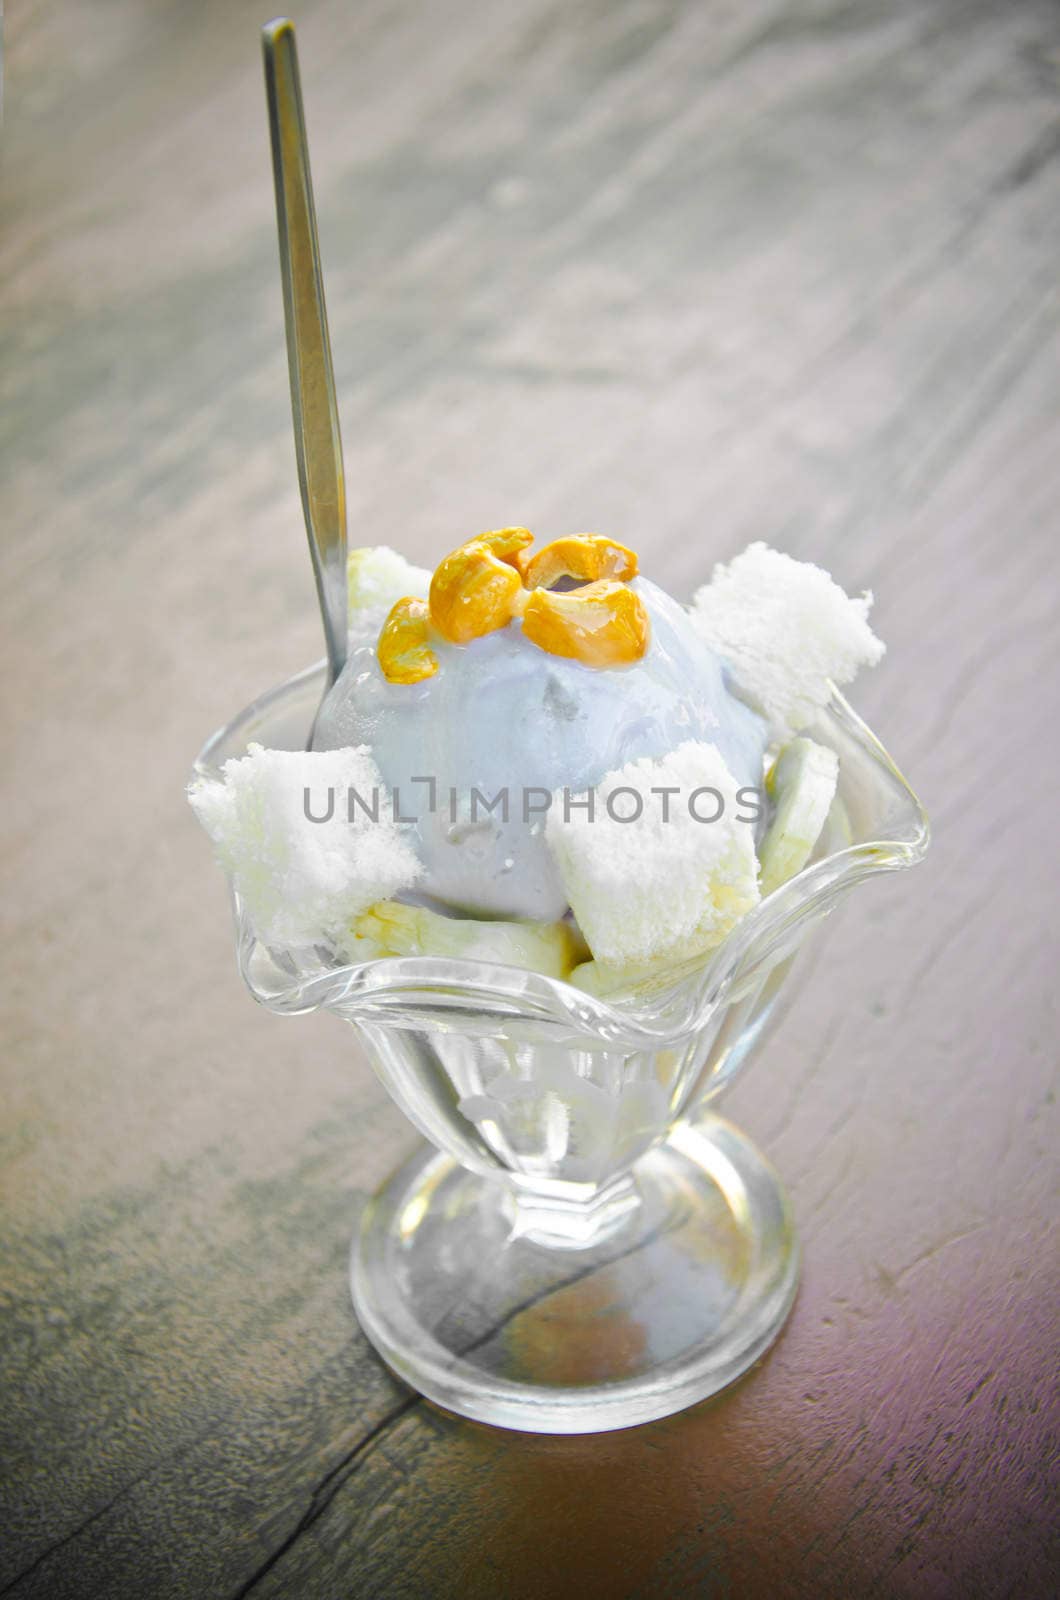 Taro ice cream with cashew in glass cup on wood table.